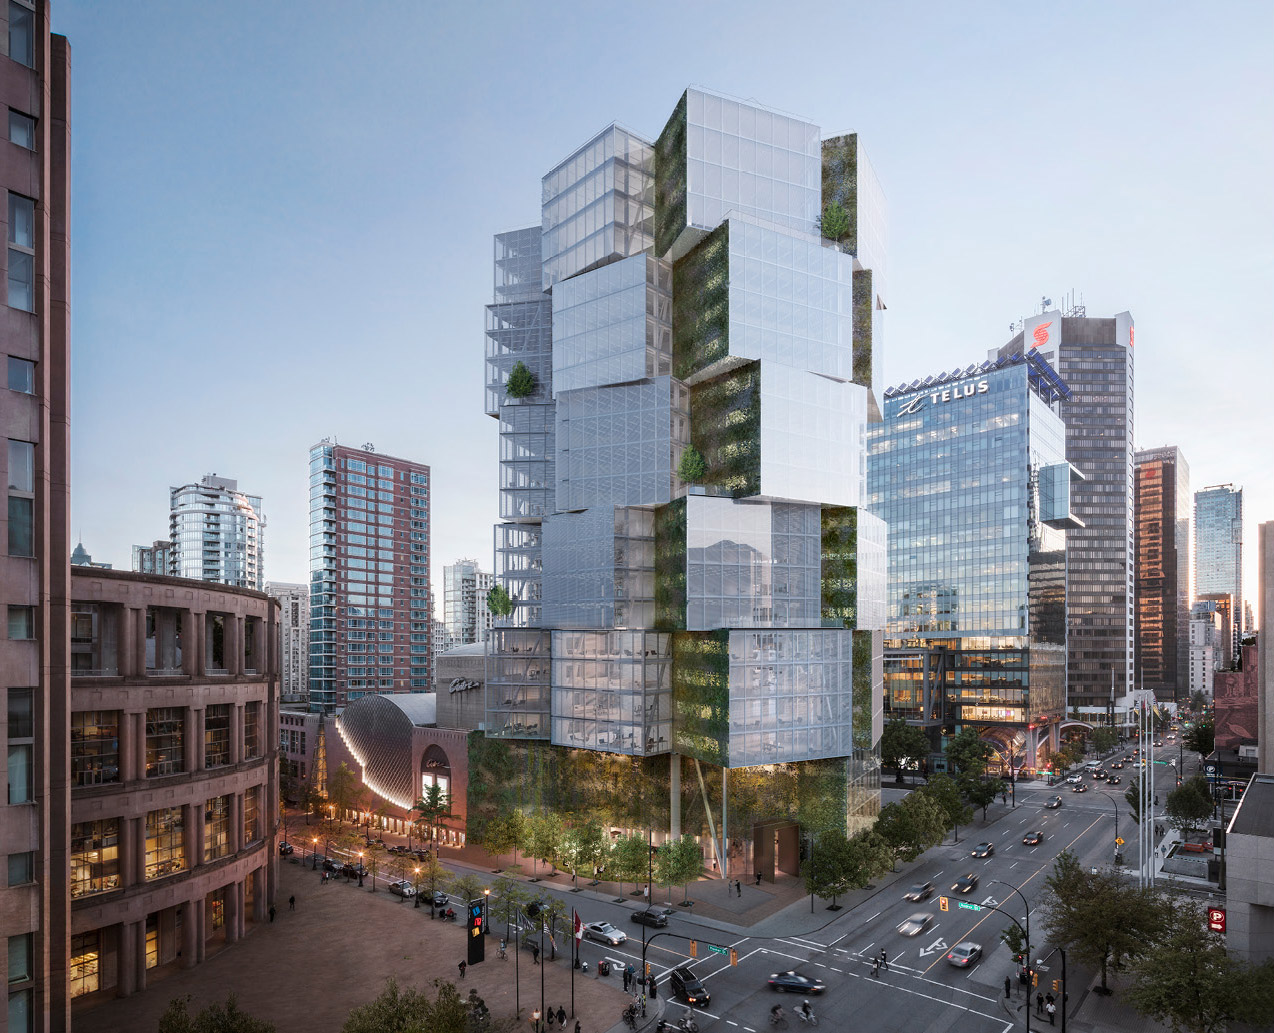 Amazon Leasing Offices in New Vancouver Tower Alongside Apple - Bloomberg